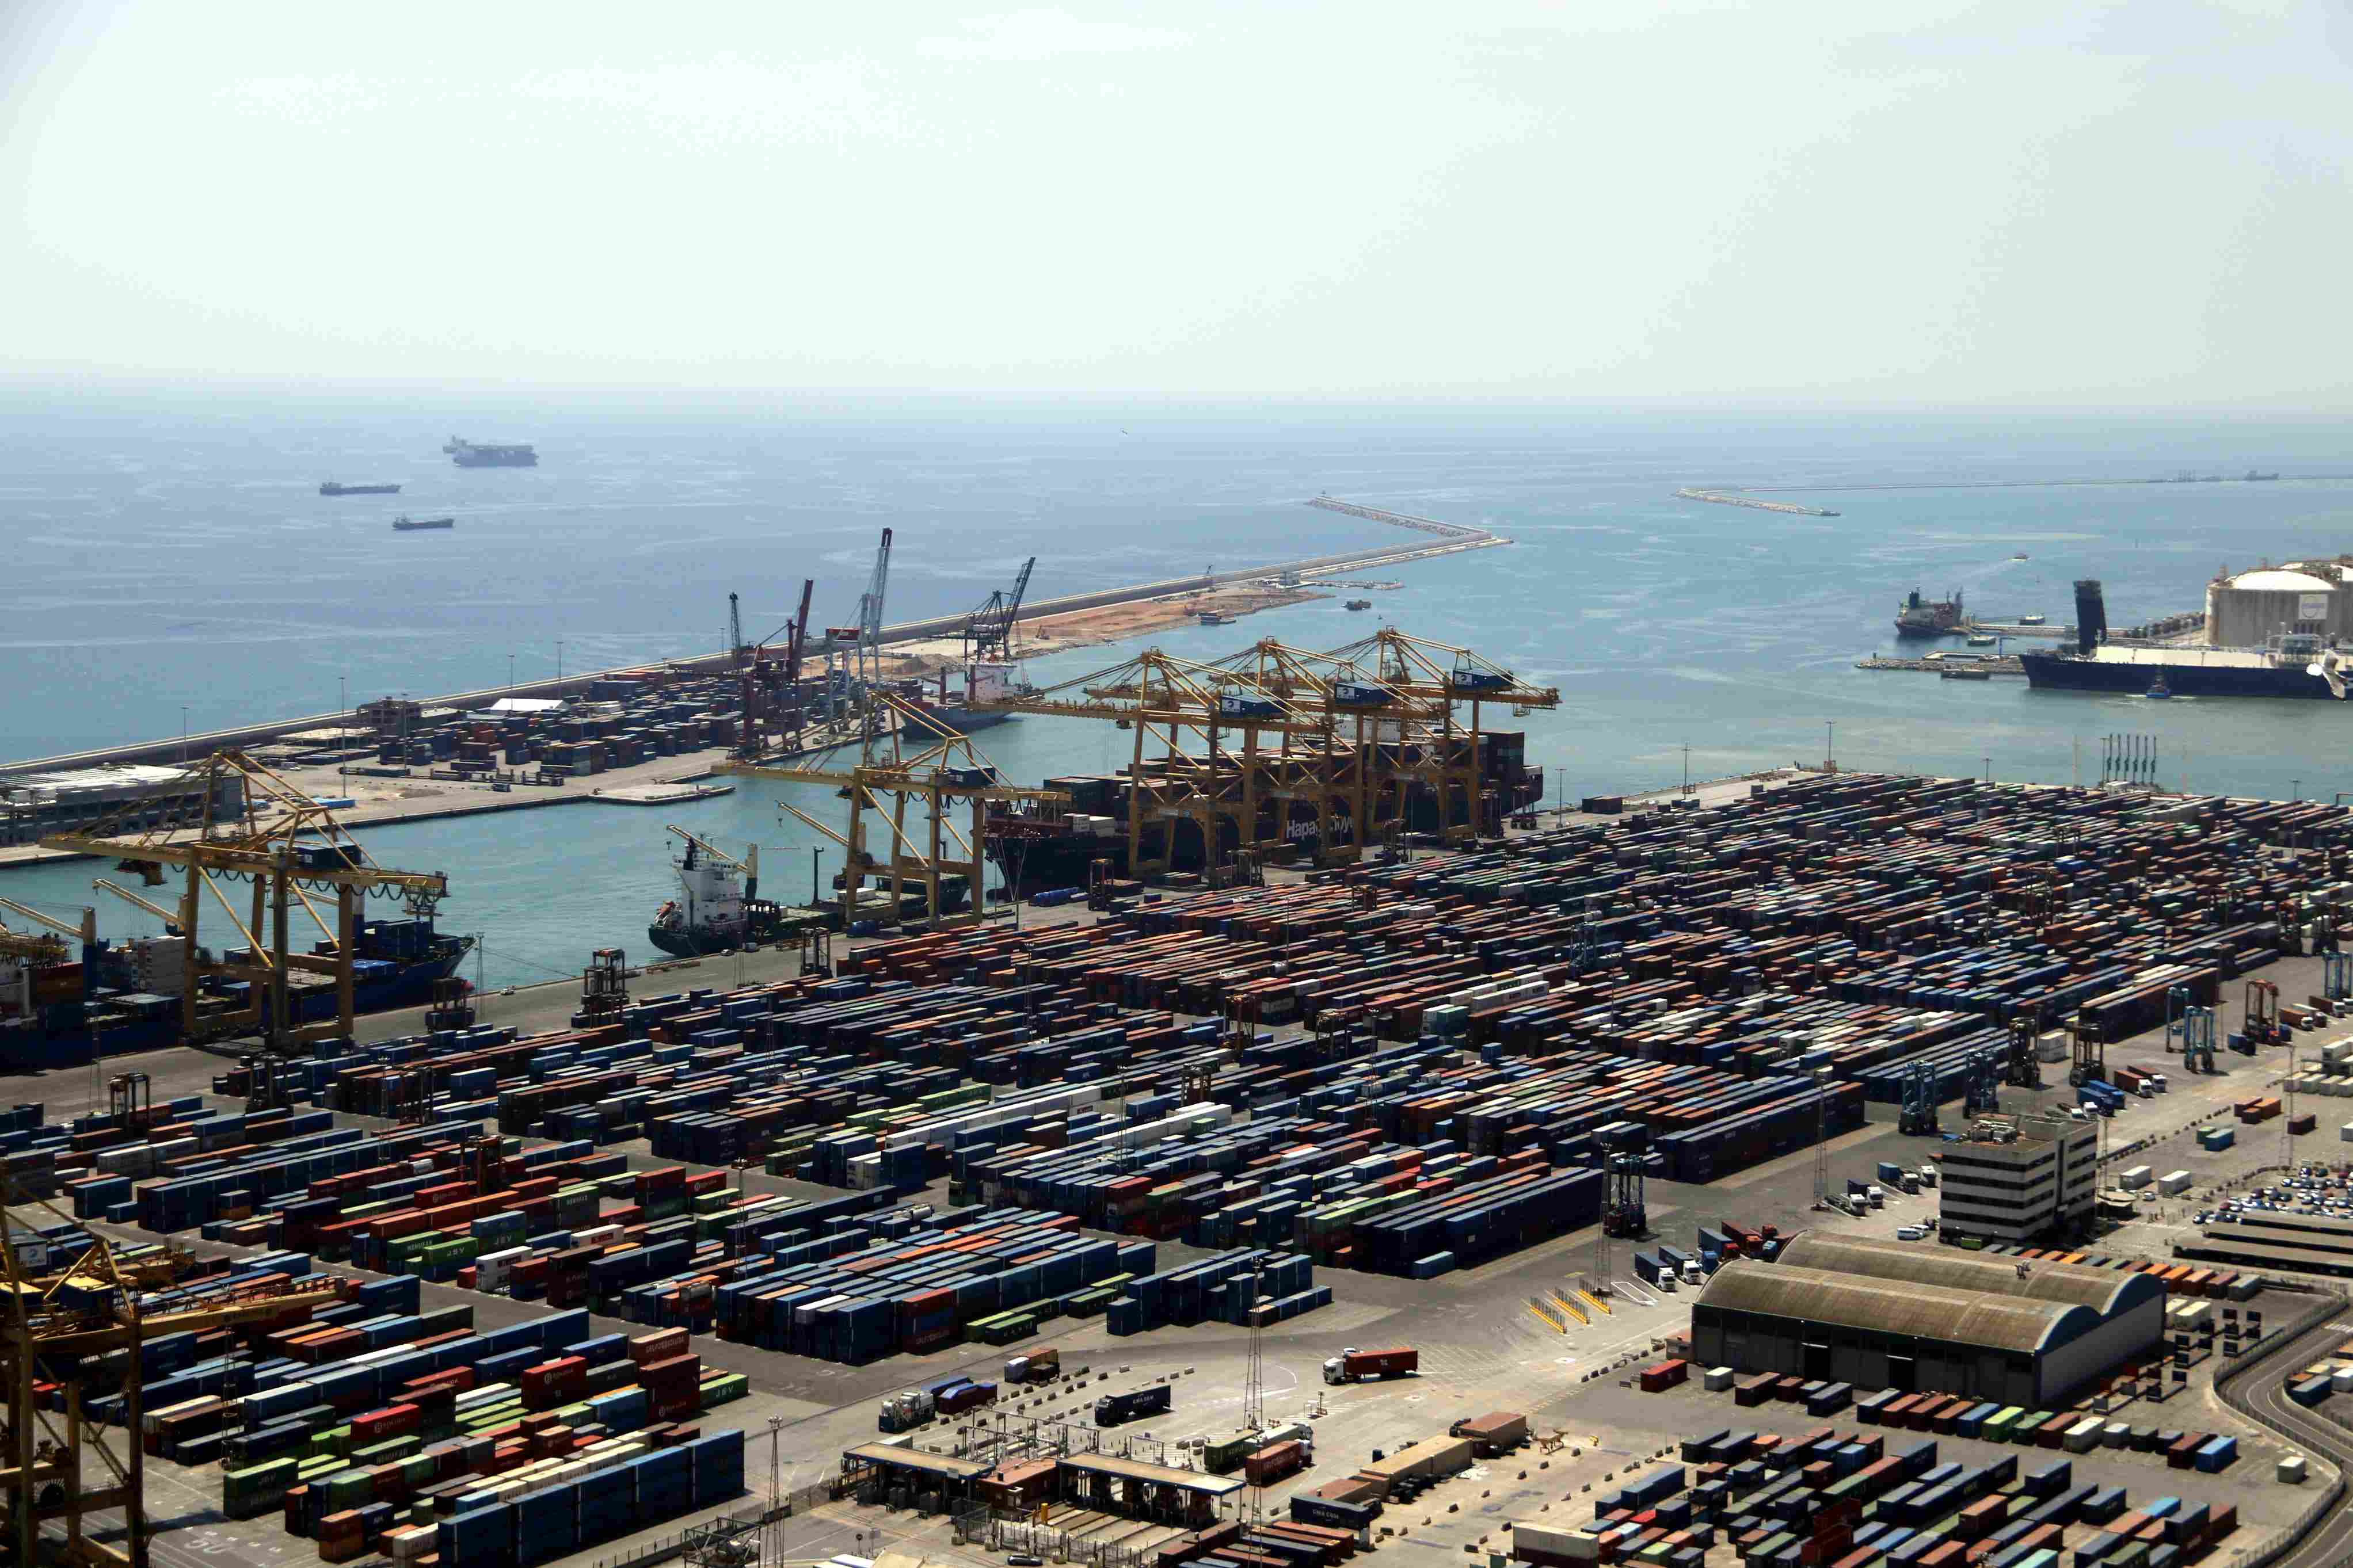 Spectacular increase in container traffic at the Port of Barcelona in October